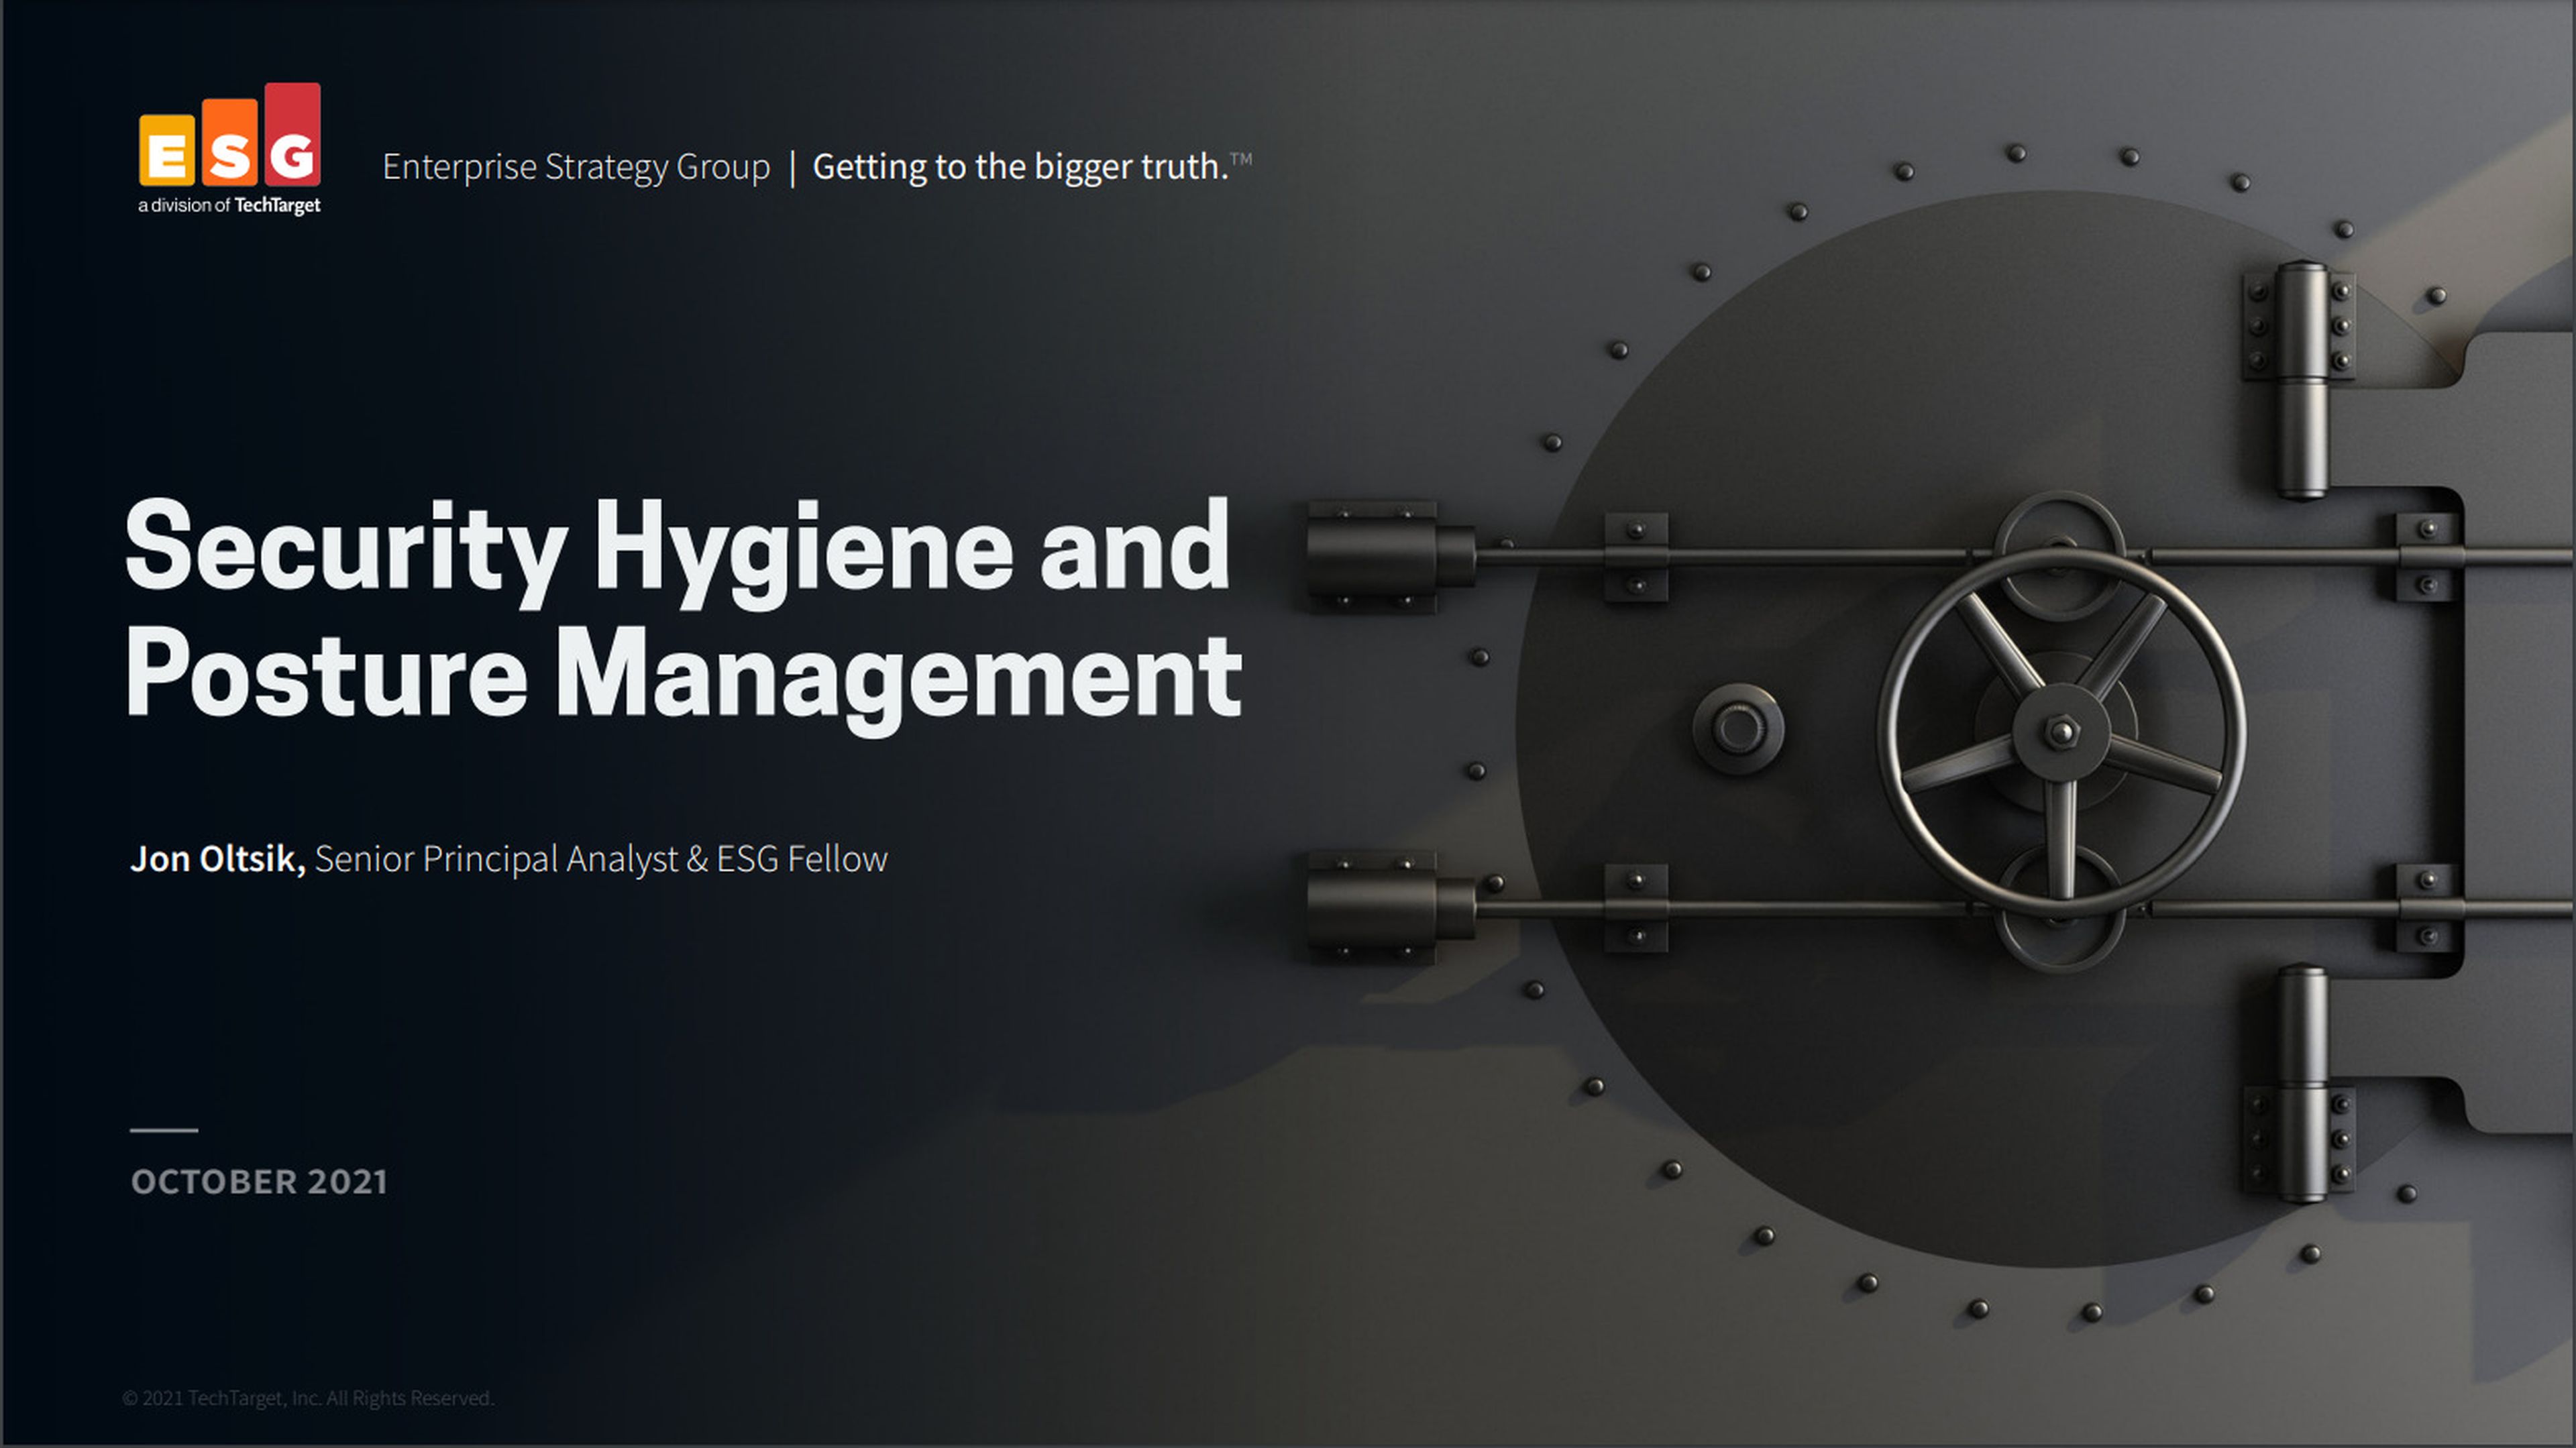 Enterprise Strategy Group: Security Hygiene and Posture Management